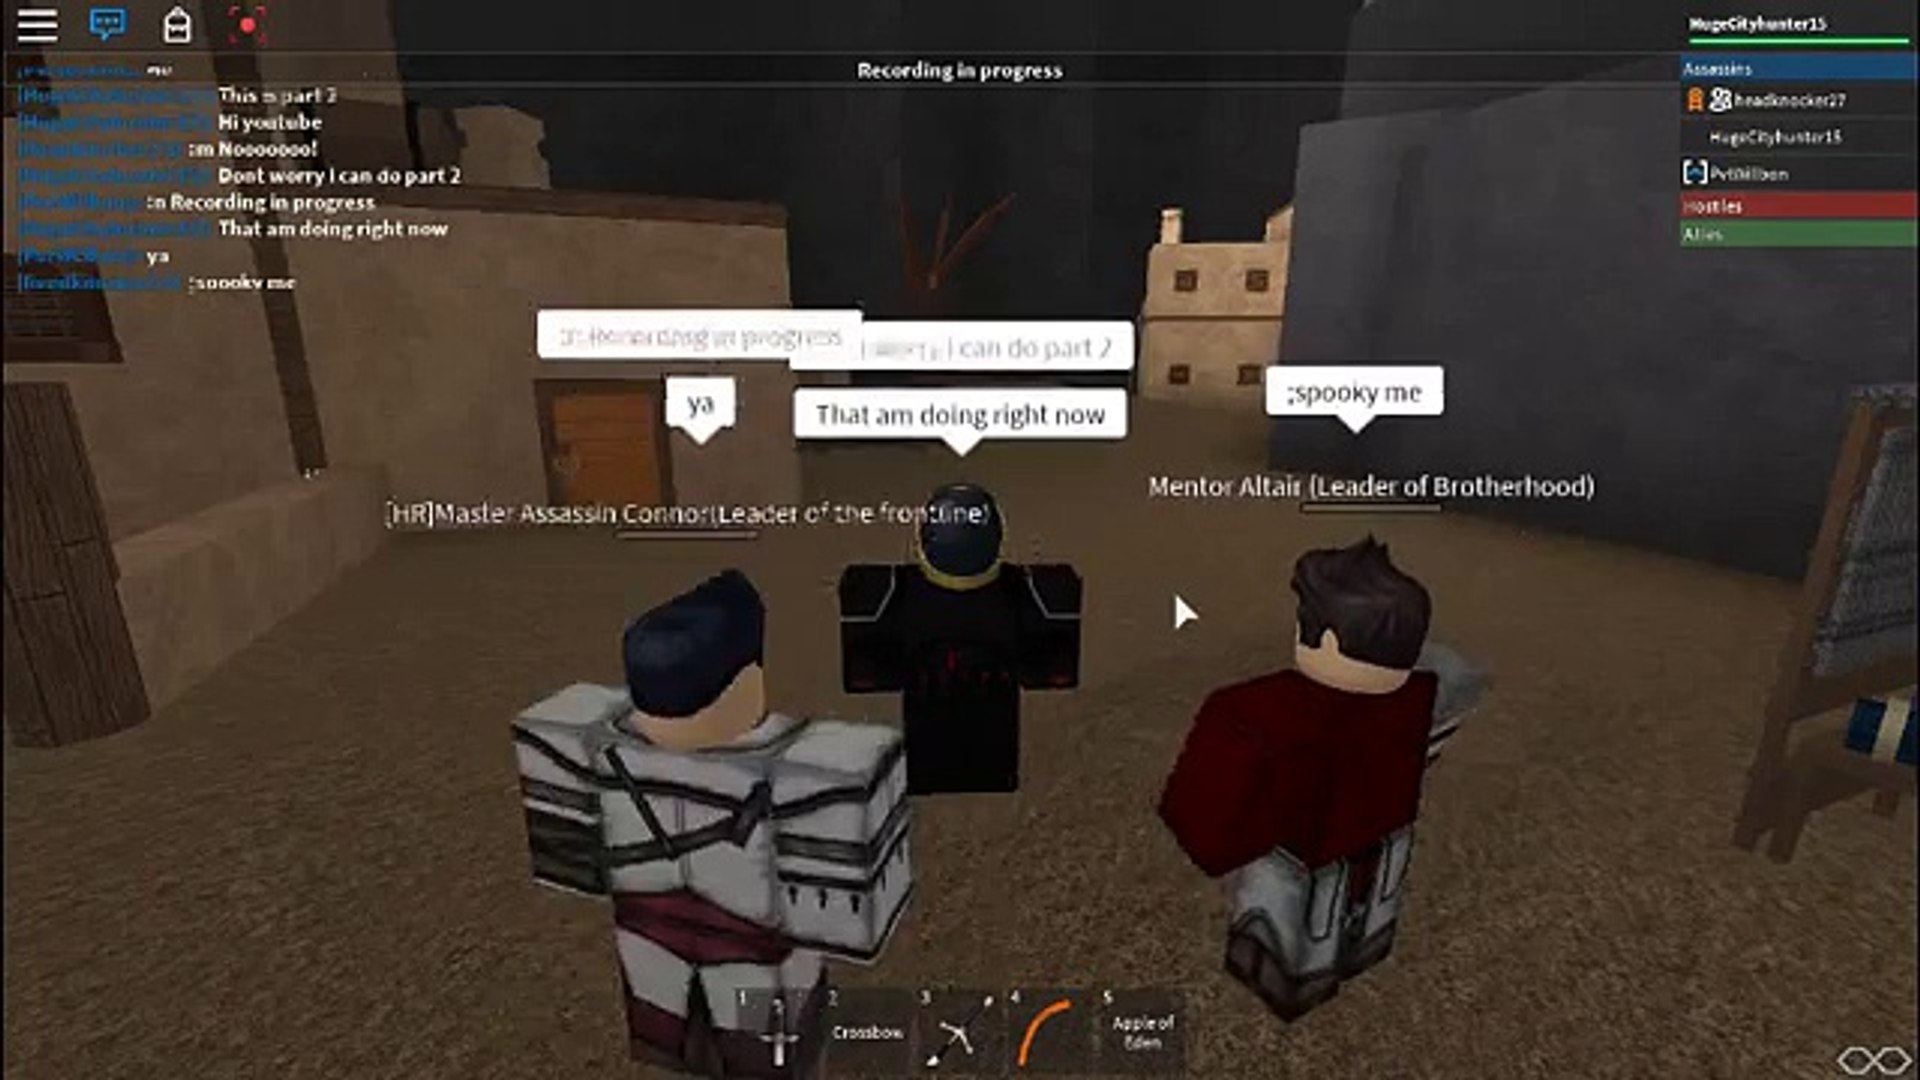 Roblox Assassins Creed Part 2 Tour Video Dailymotion - assassin creed games on roblox please